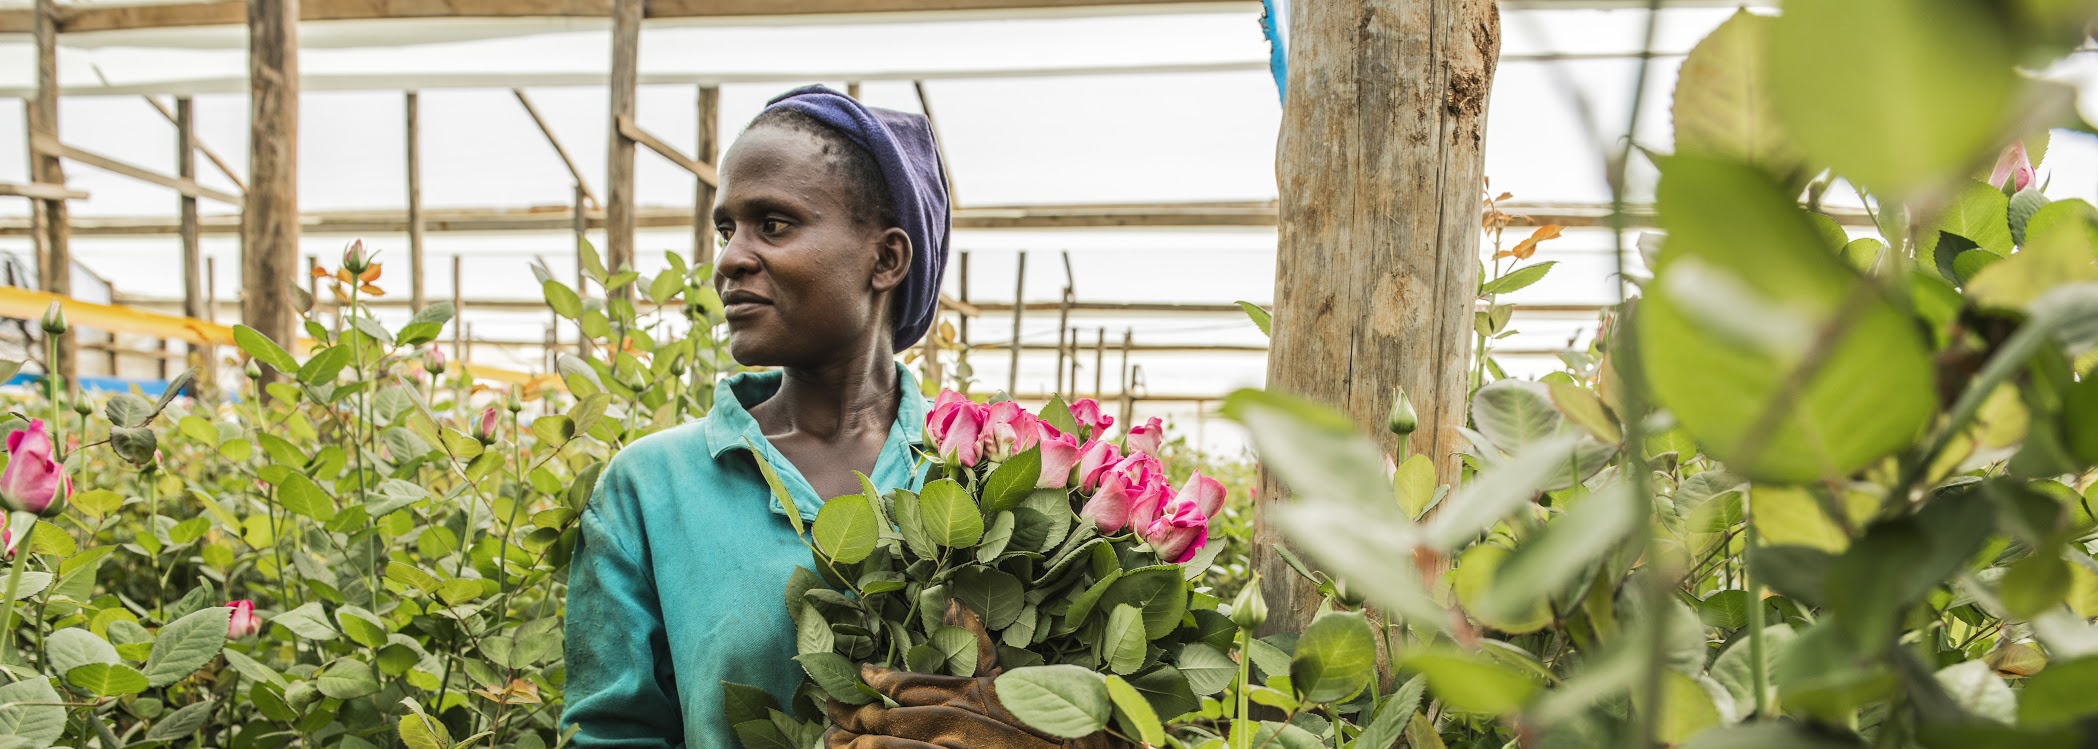 Blog: Flower farm workers are yet to benefit from the sector despite increased revenues